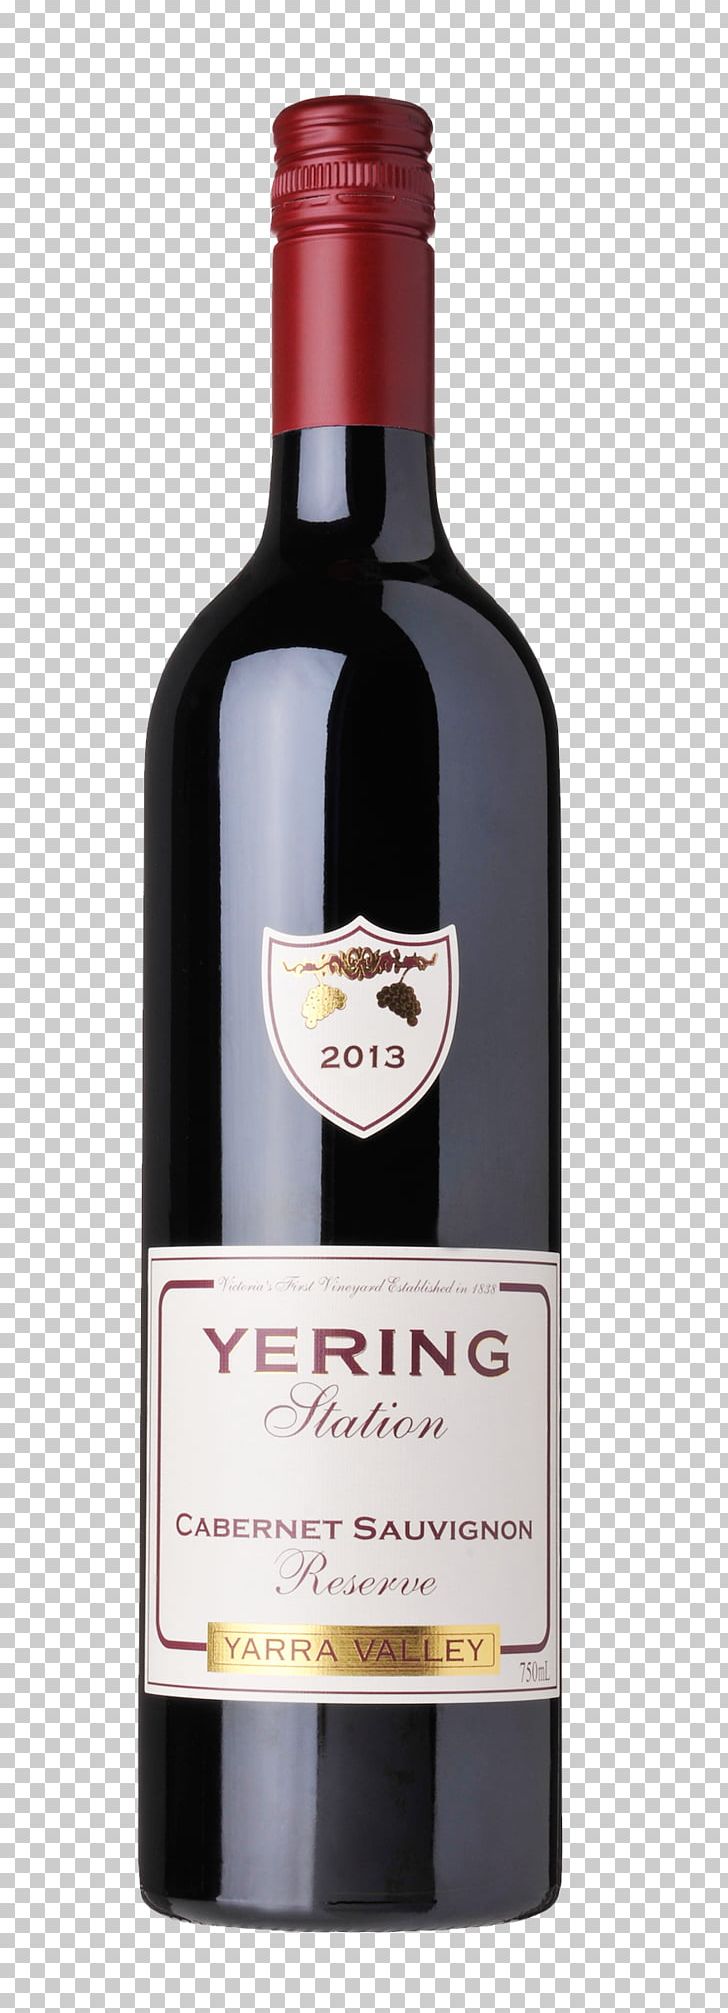 Yering Station Winery Yarra Valley Chardonnay Red Wine PNG, Clipart, Alcoholic Beverage, Bottle, Cabernet Sauvignon, Chardonnay, Dessert Wine Free PNG Download